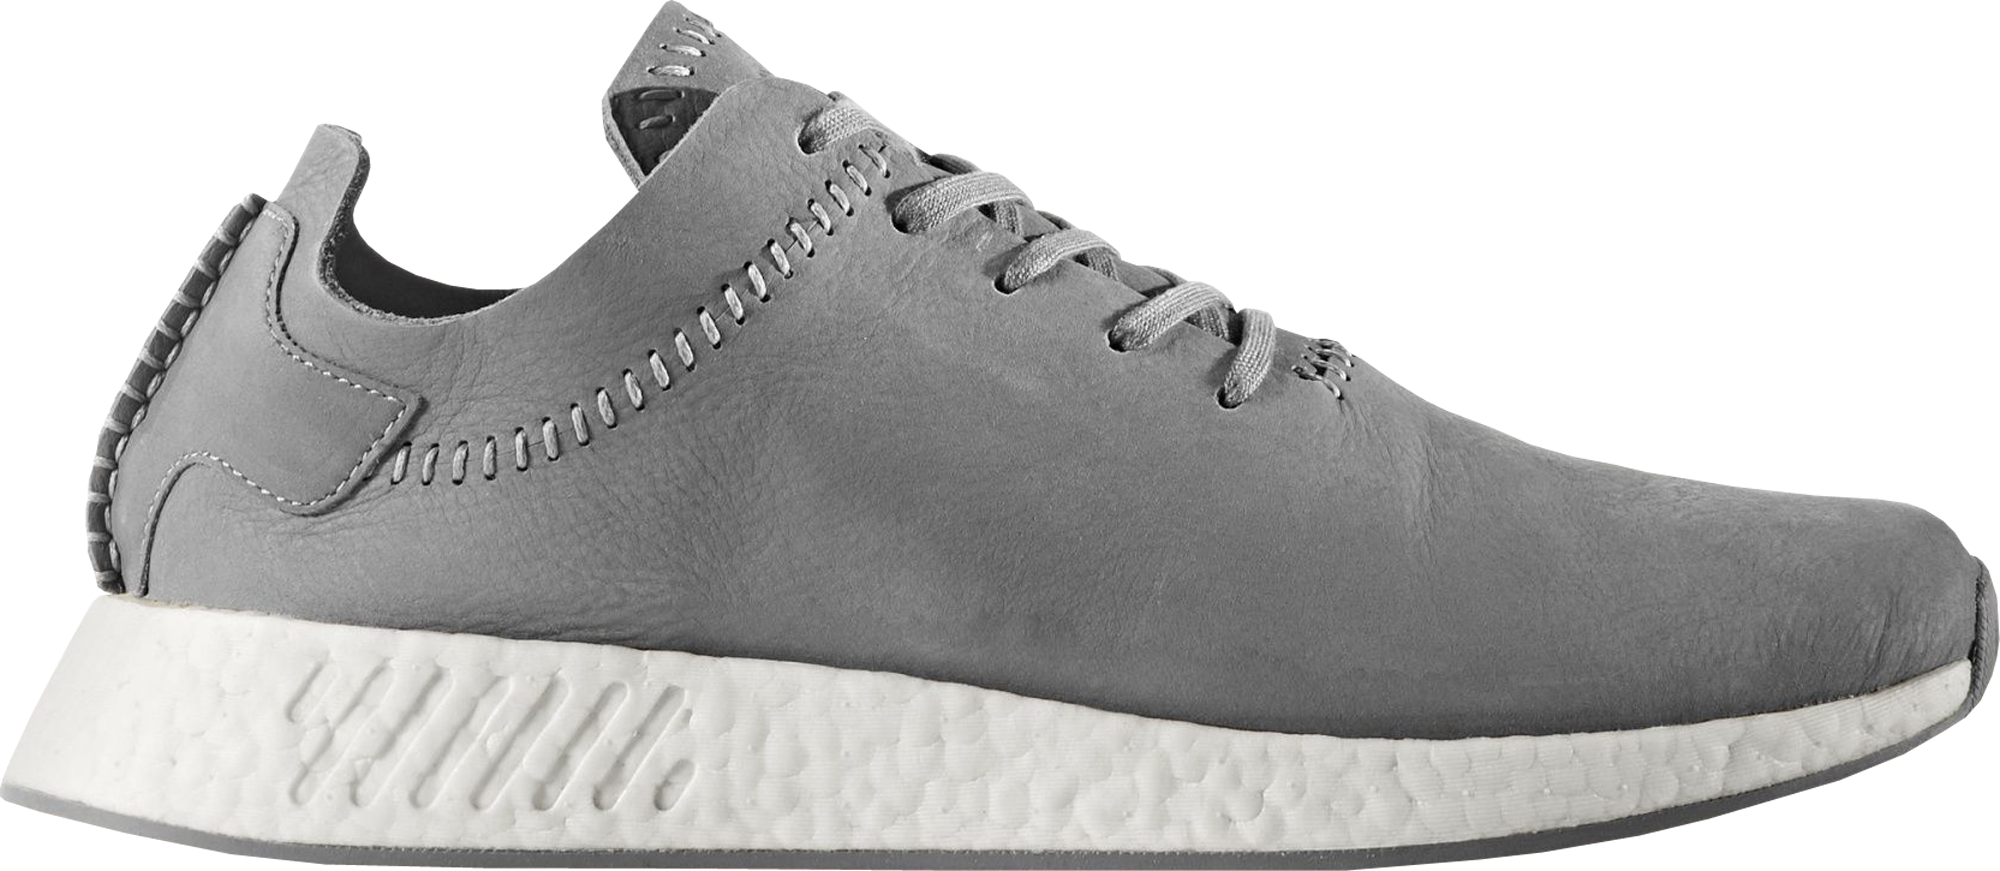 wings horns nmd r2 primeknit shoes